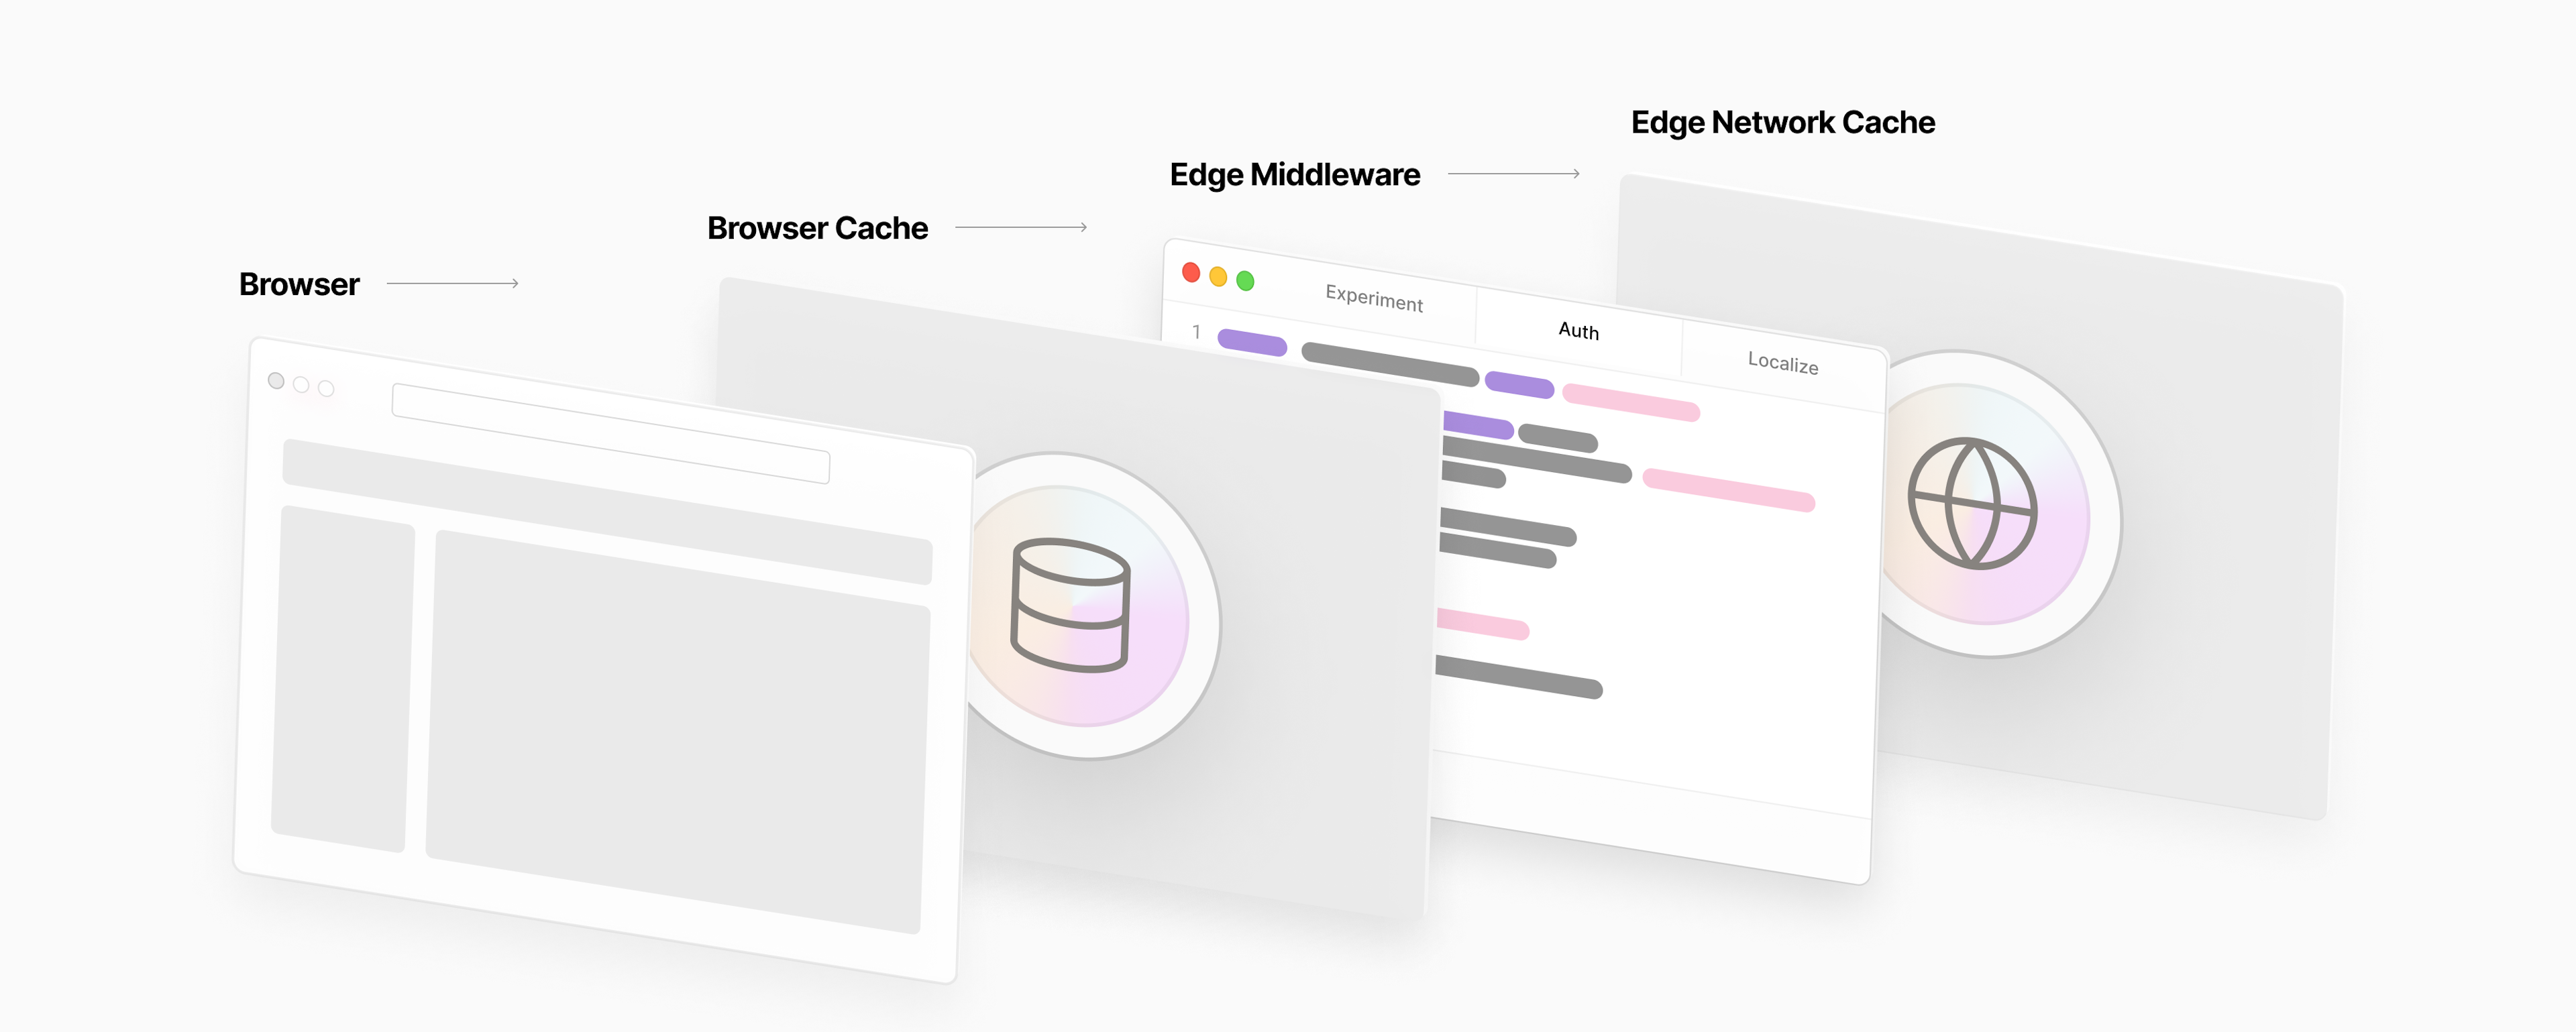 Edge Middleware runs before the Edge Network Cache, for fast rewrites and redirects